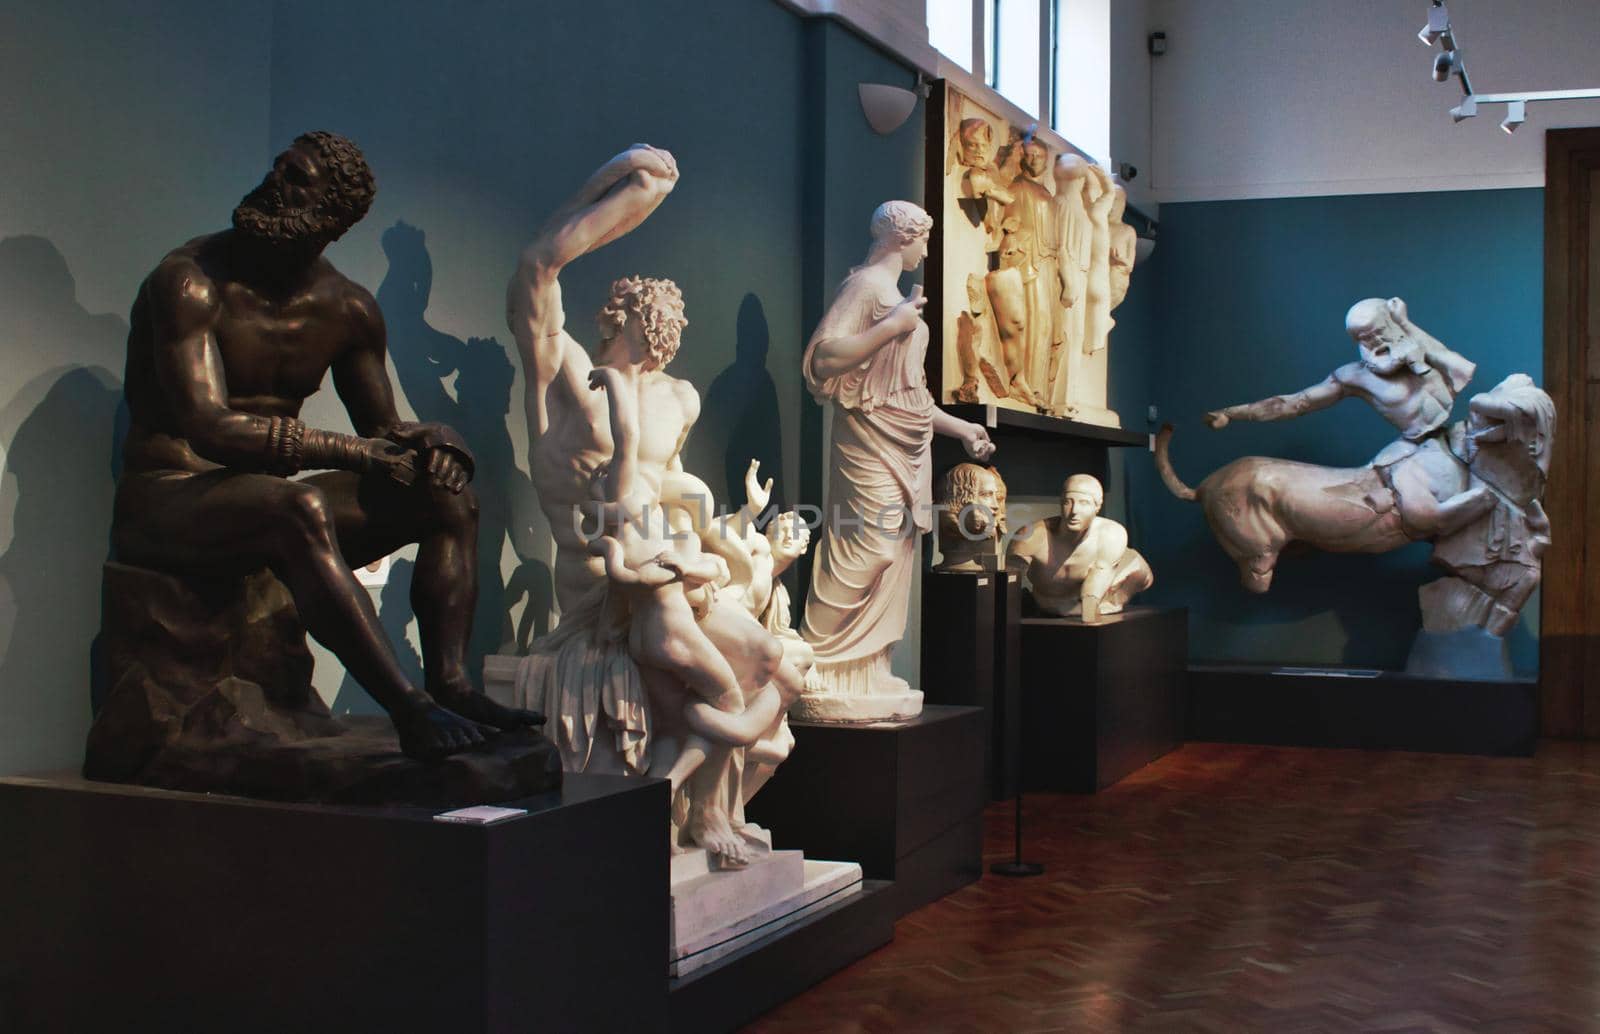 Oxford, UK - March 02 2020: Marble and bronze statues on display in the Ashmolean Museum in Oxford, England